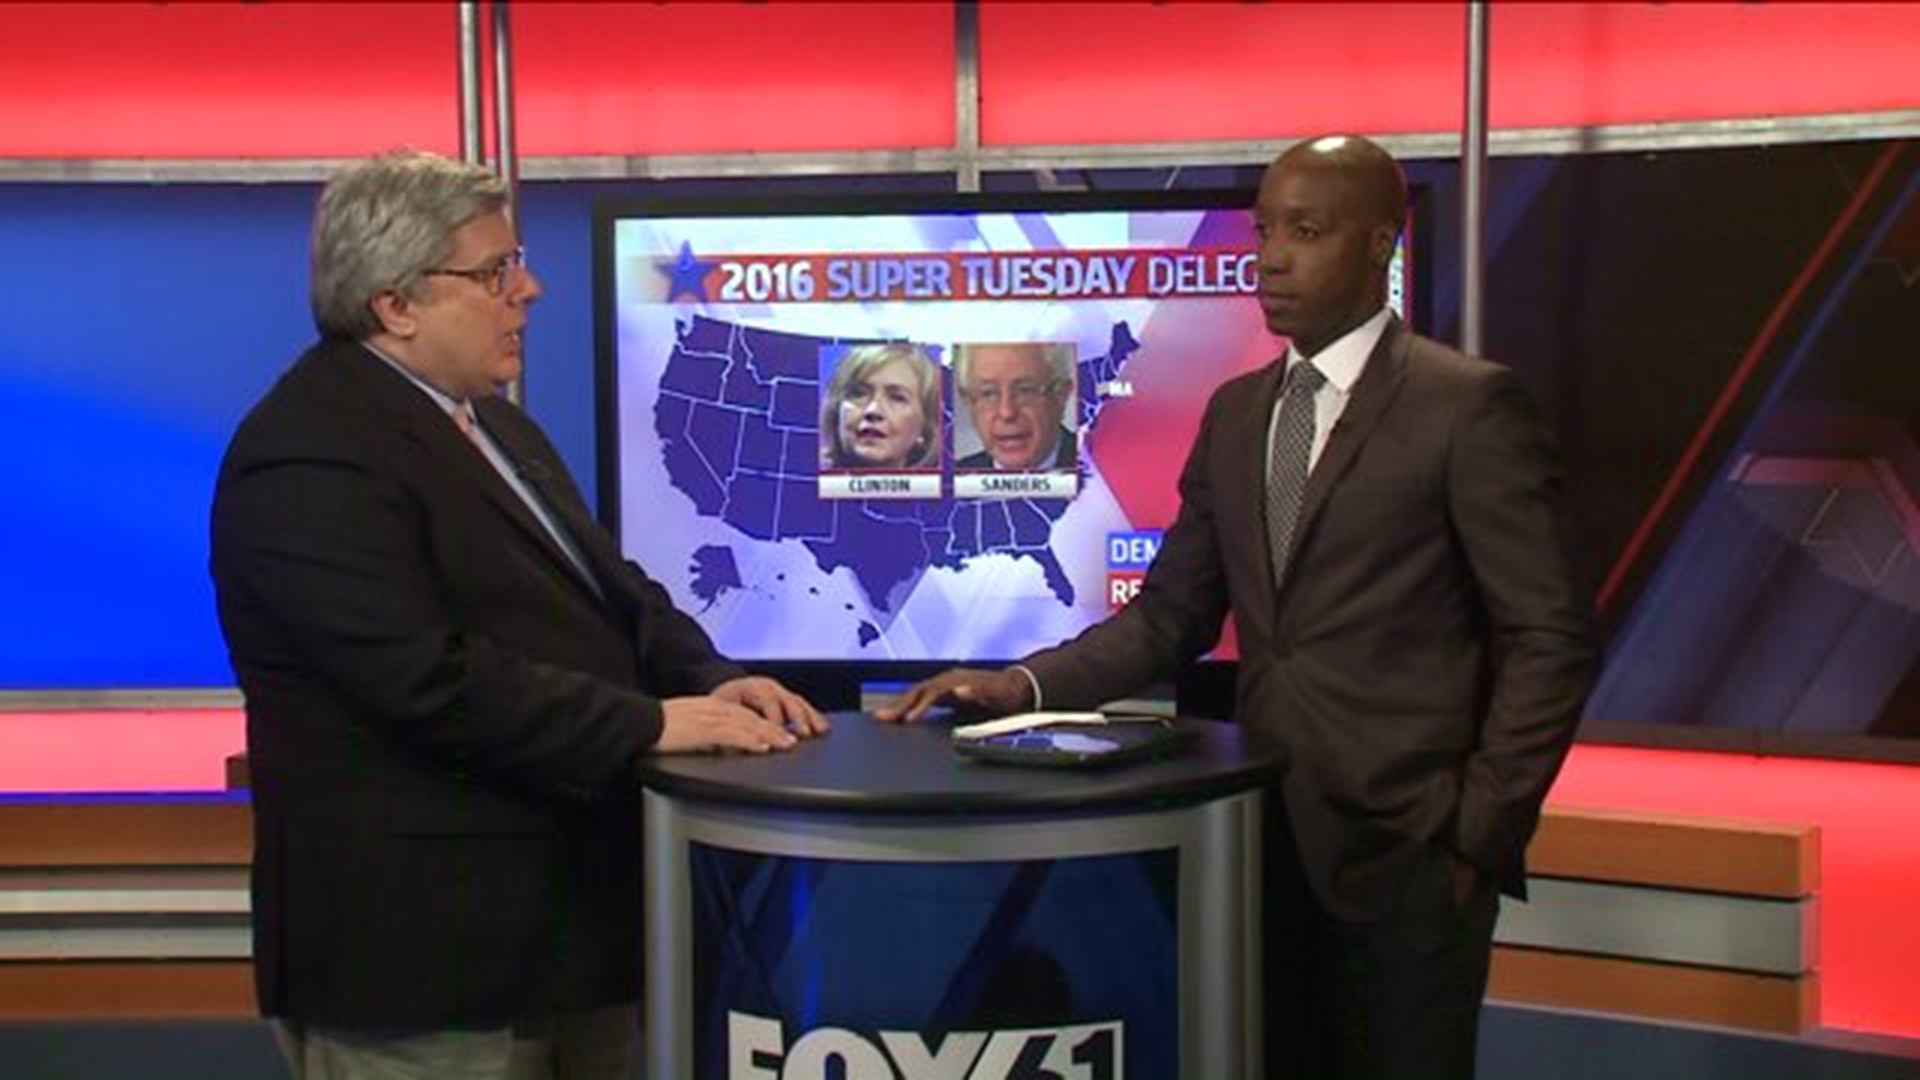 Analyzing Super Tuesday results with Salon.com political columnist Bill Curry